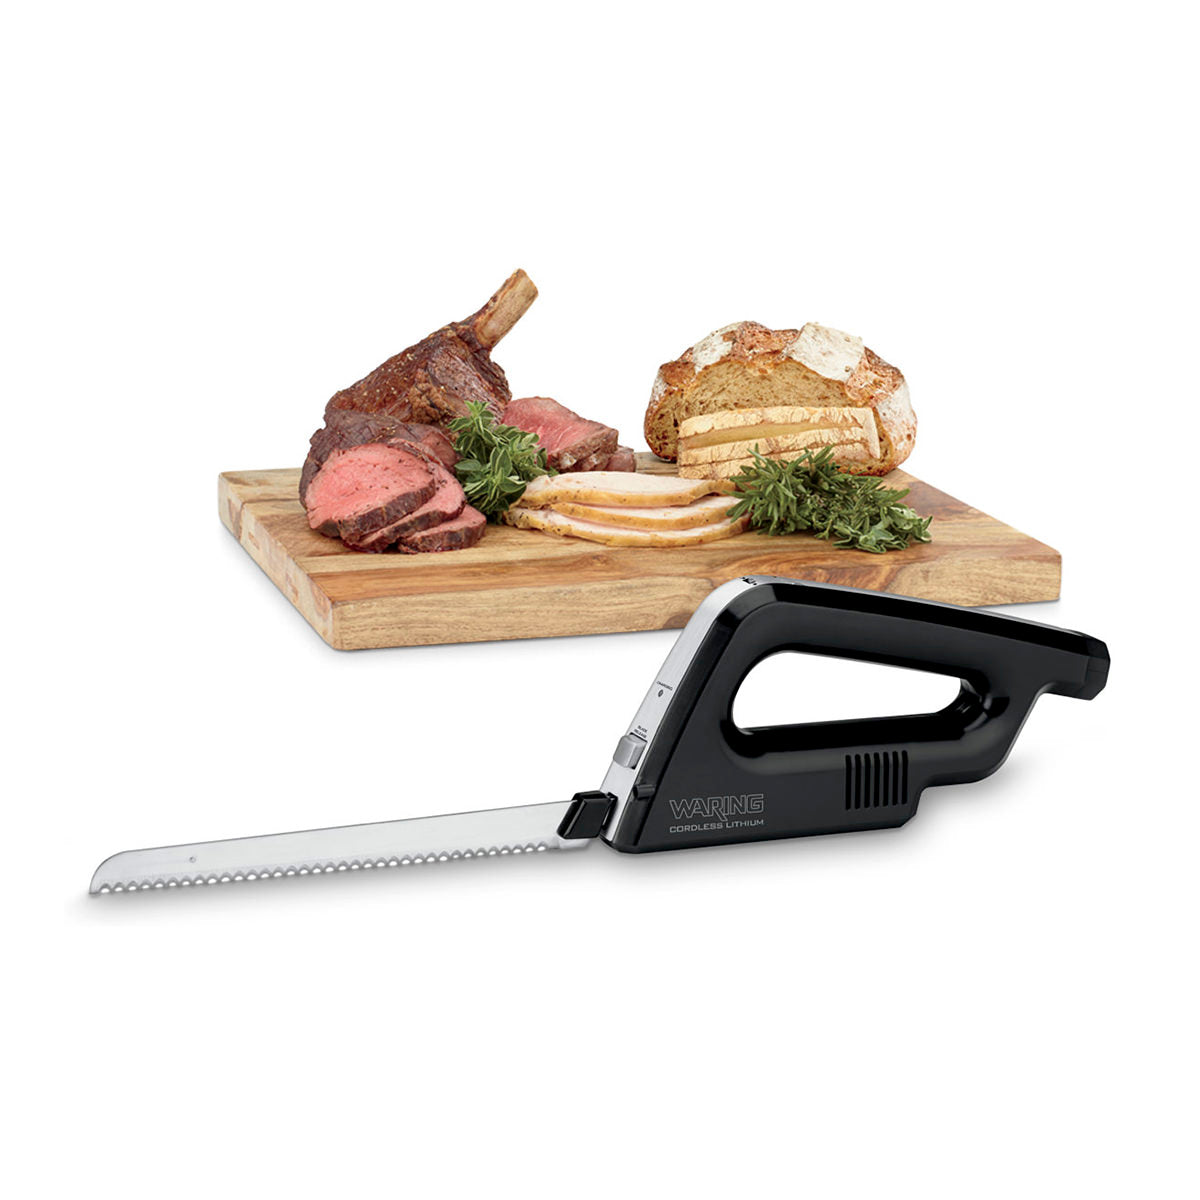 WEK200 Wireless Rechargeable Lithium Electric Knife with Bread & Carving Blades by Waring Commercial